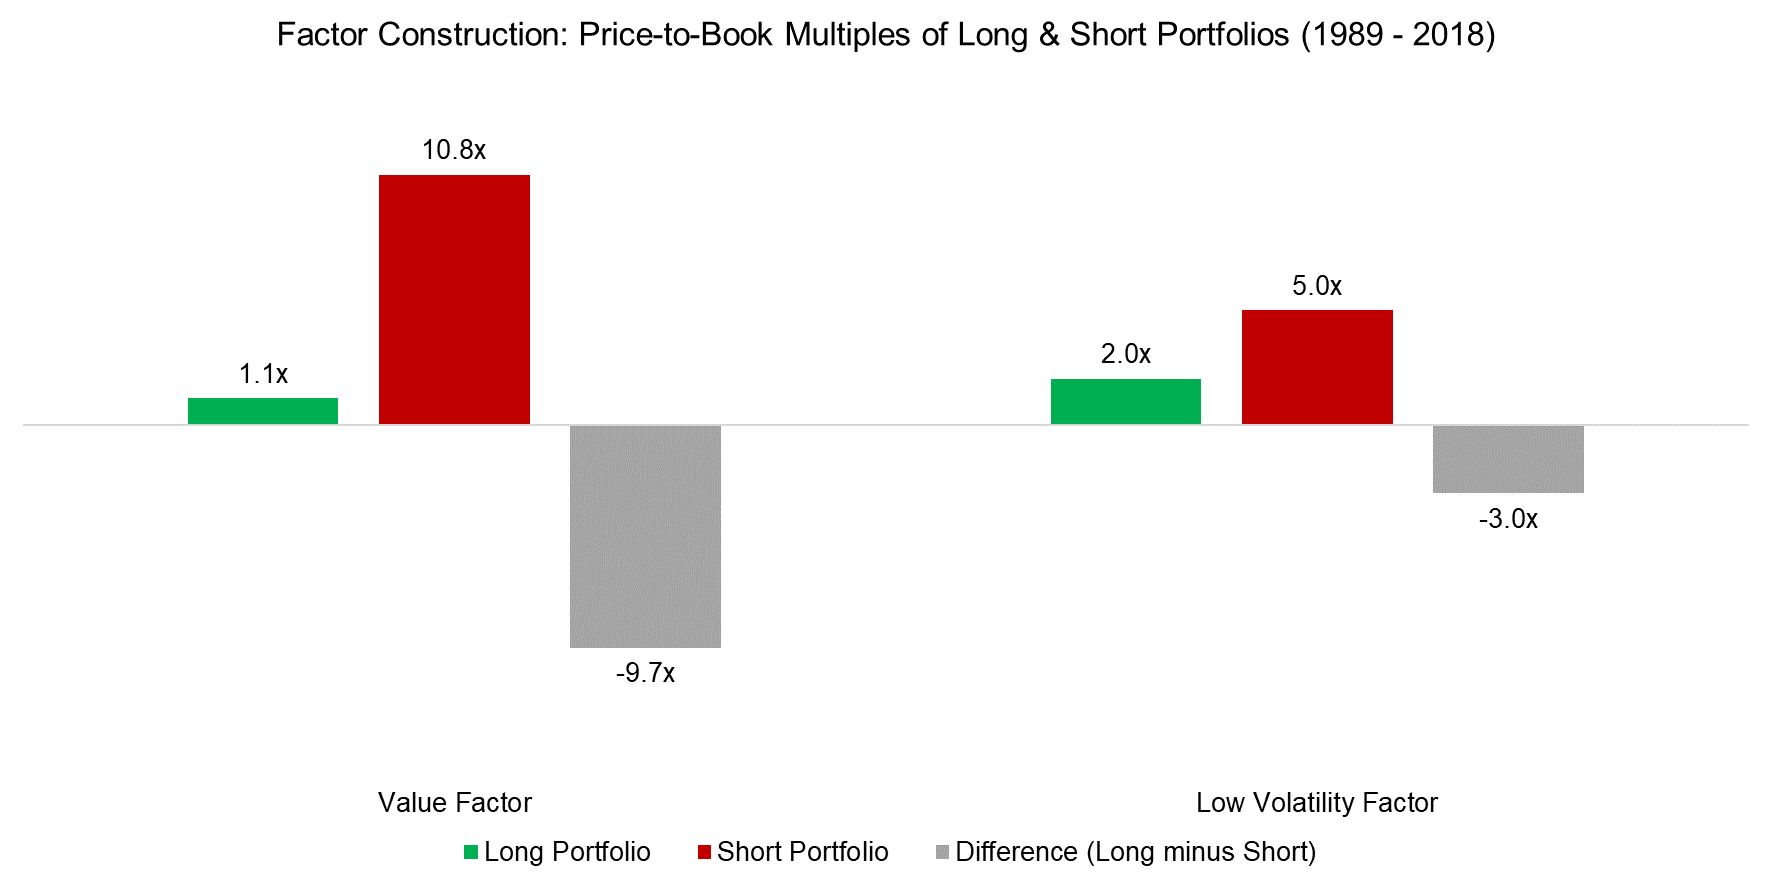 Factor Construction Price-to-Book Multiples of Long & Short Portfolios (1989 - 2018)